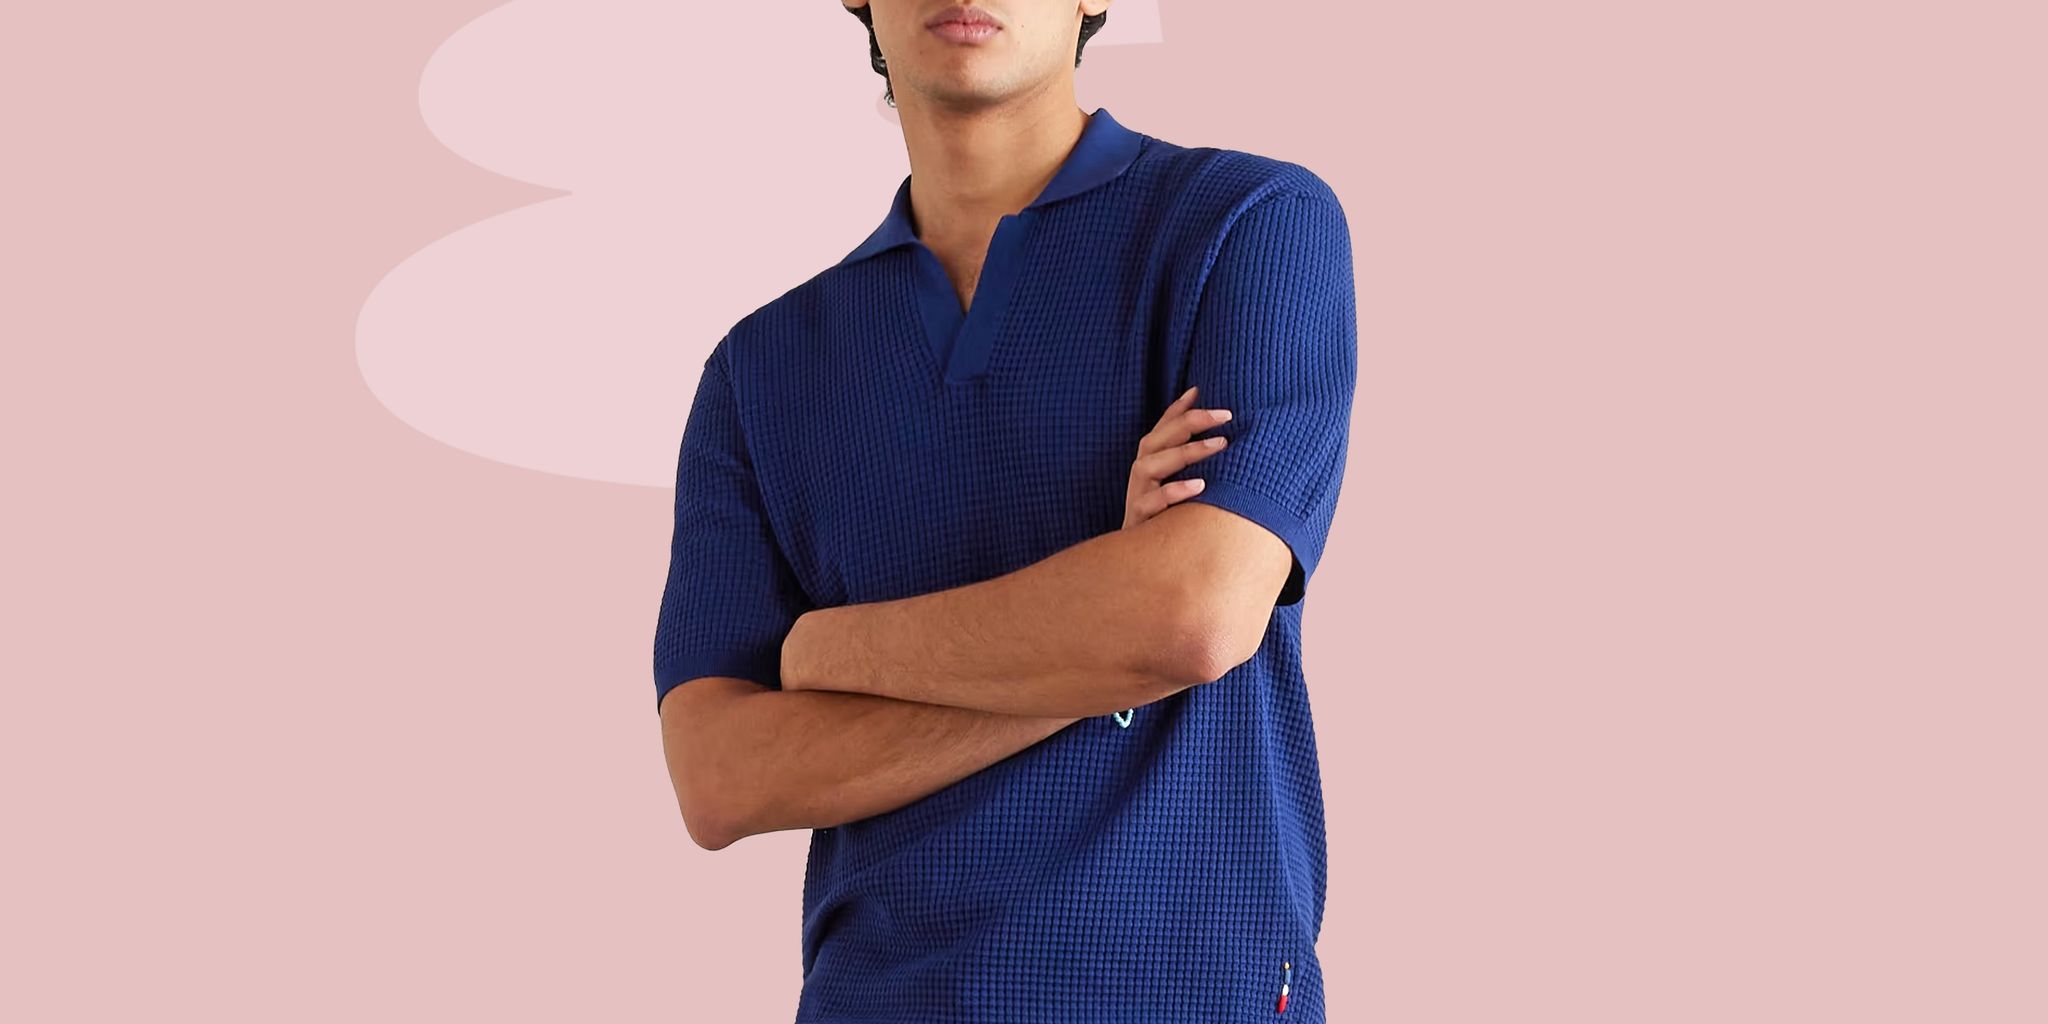 Men's Polo Shirts - Cotton, Knitted & More